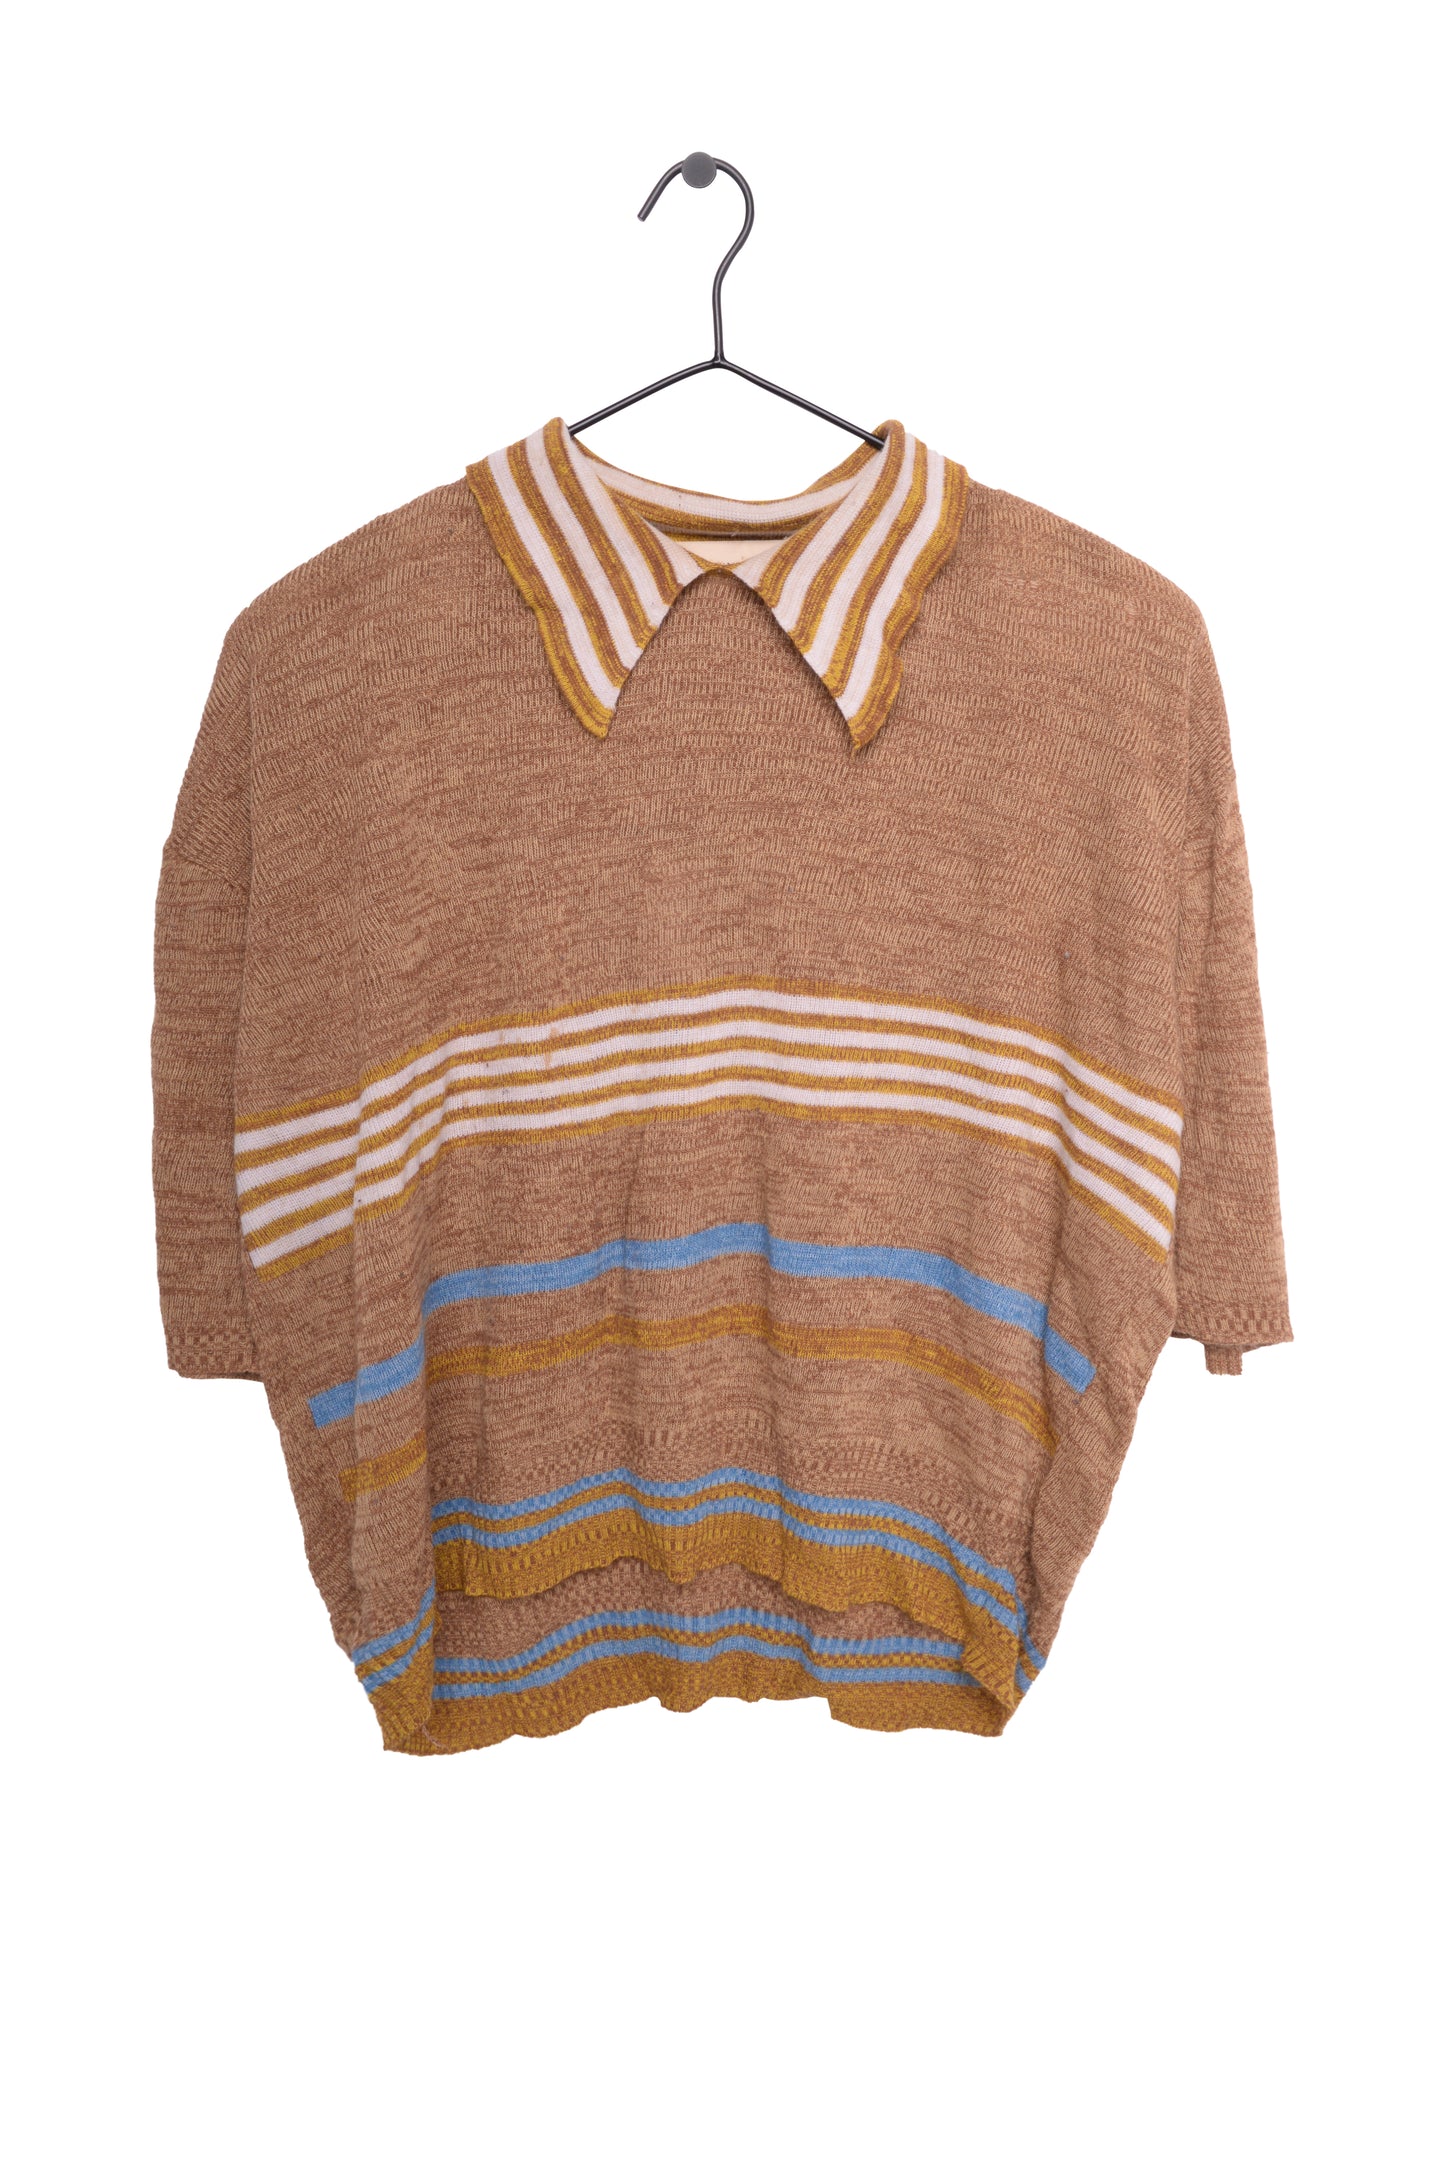 1970s Knit Collared Top